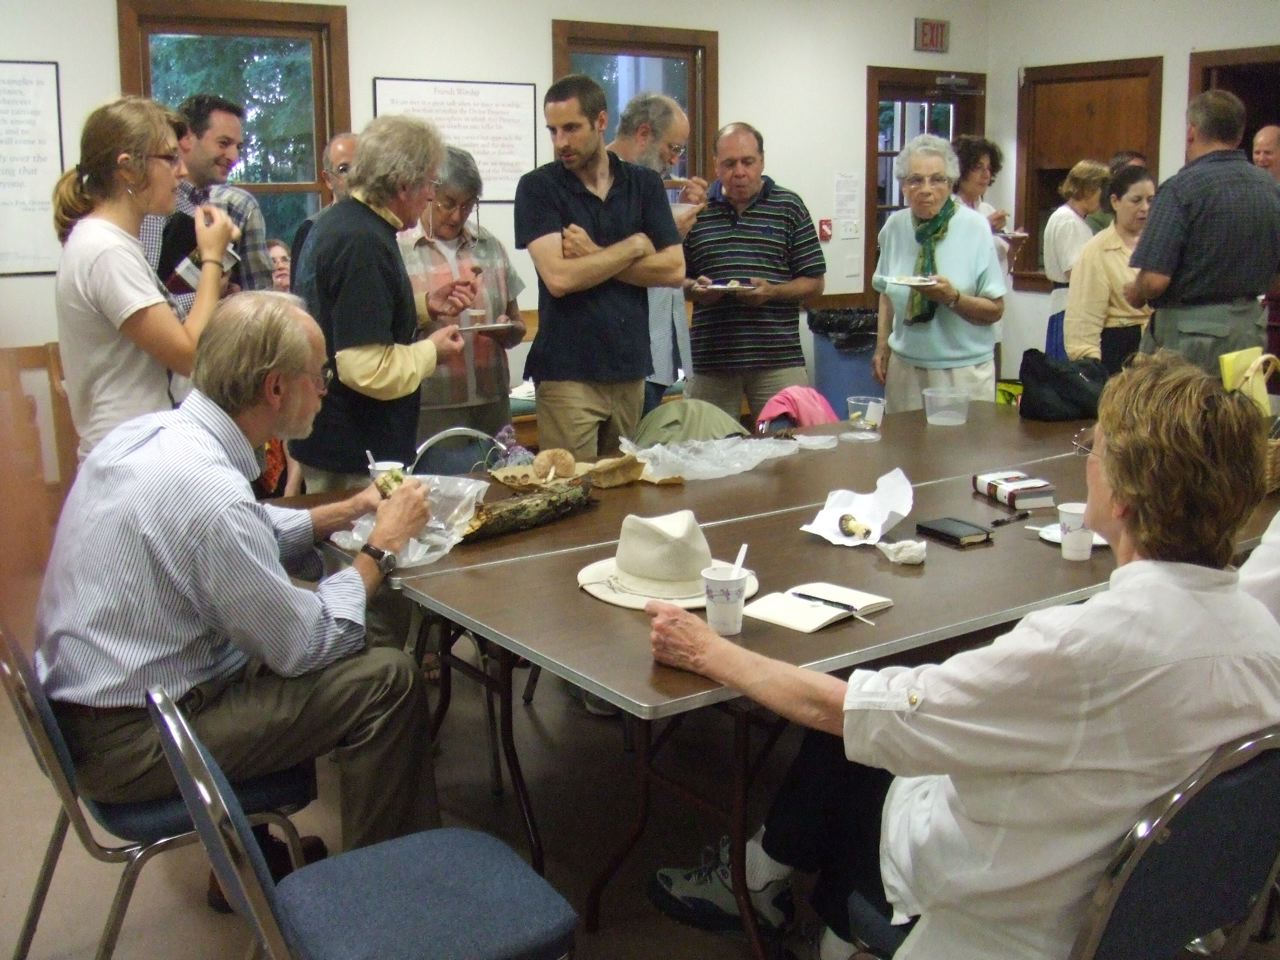 Gary Lincoff talks with Carol Levine about a mushroom collected, while others listen in. 0753.jpg